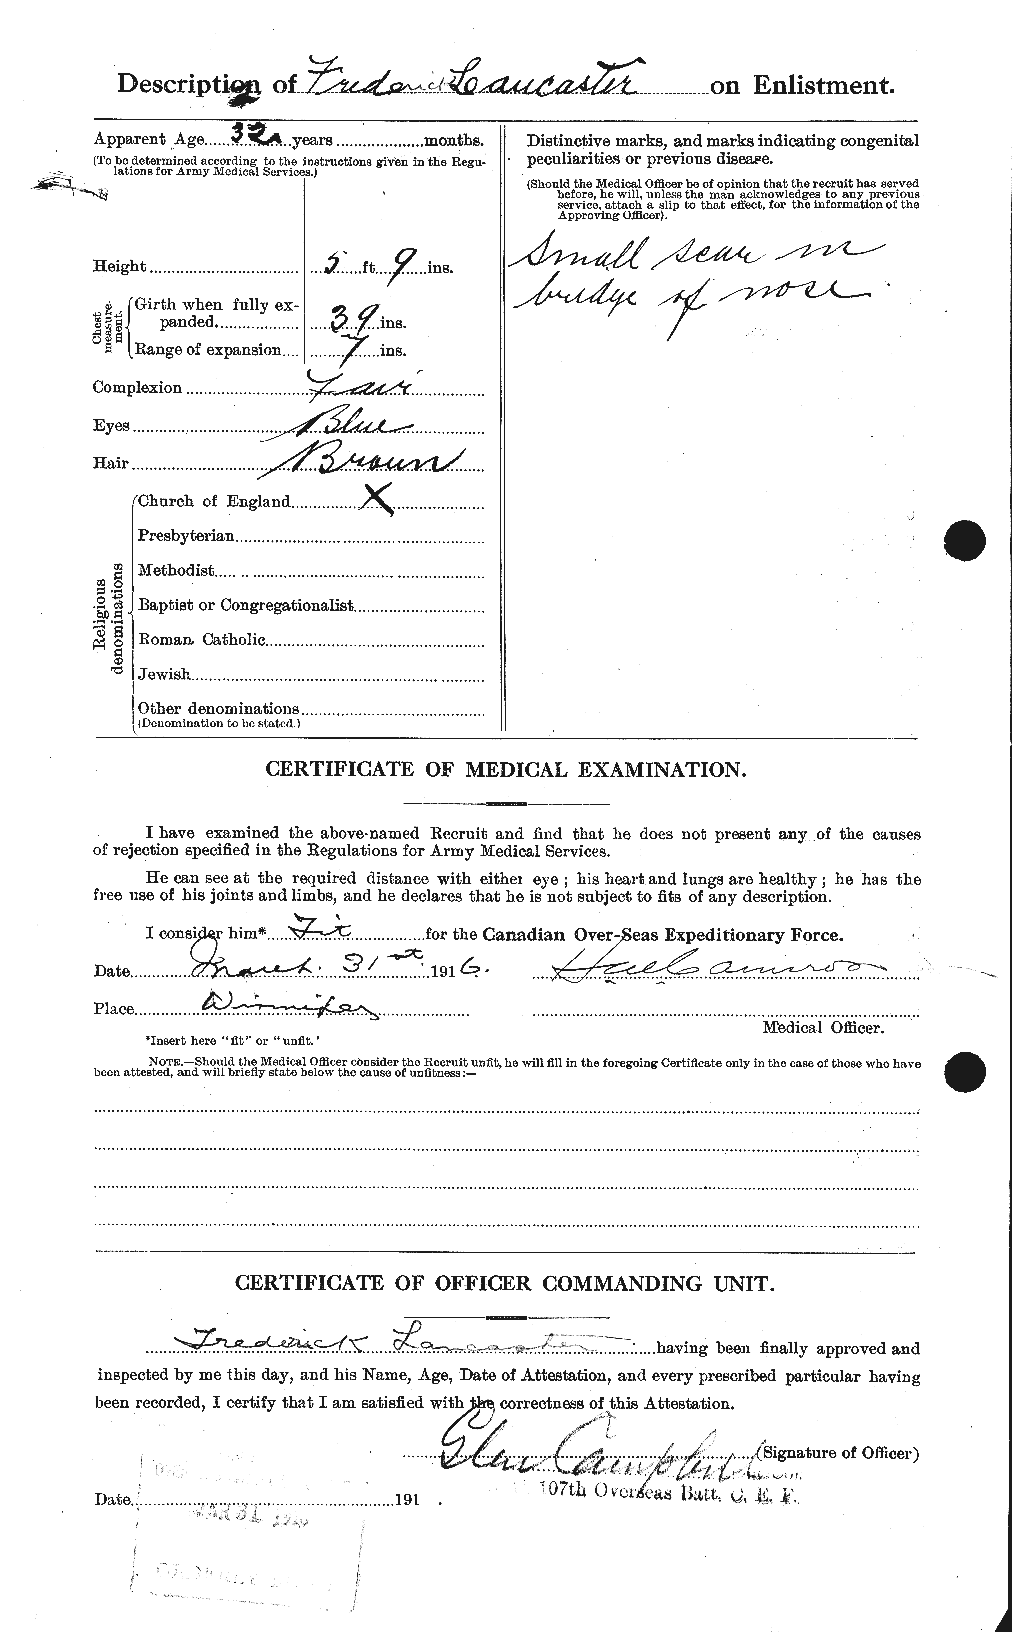 Personnel Records of the First World War - CEF 445411b